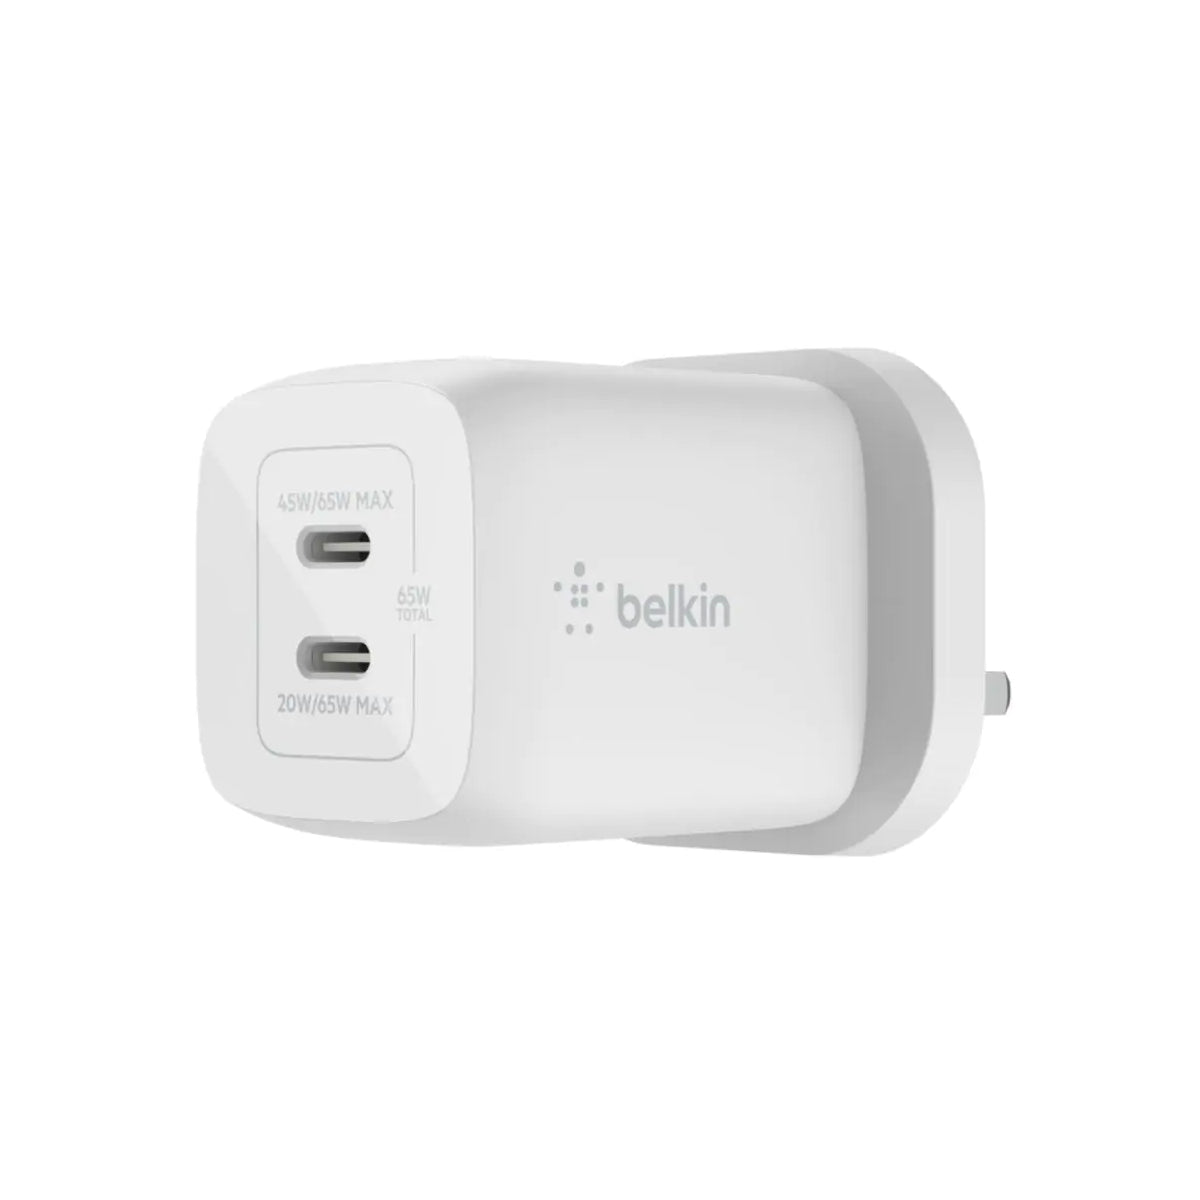 Belkin BoostCharge Pro Dual USB-C Wall Charger with PPS 65W w/ USB-C to USB-C Cable - White - شاحن - Store 974 | ستور ٩٧٤